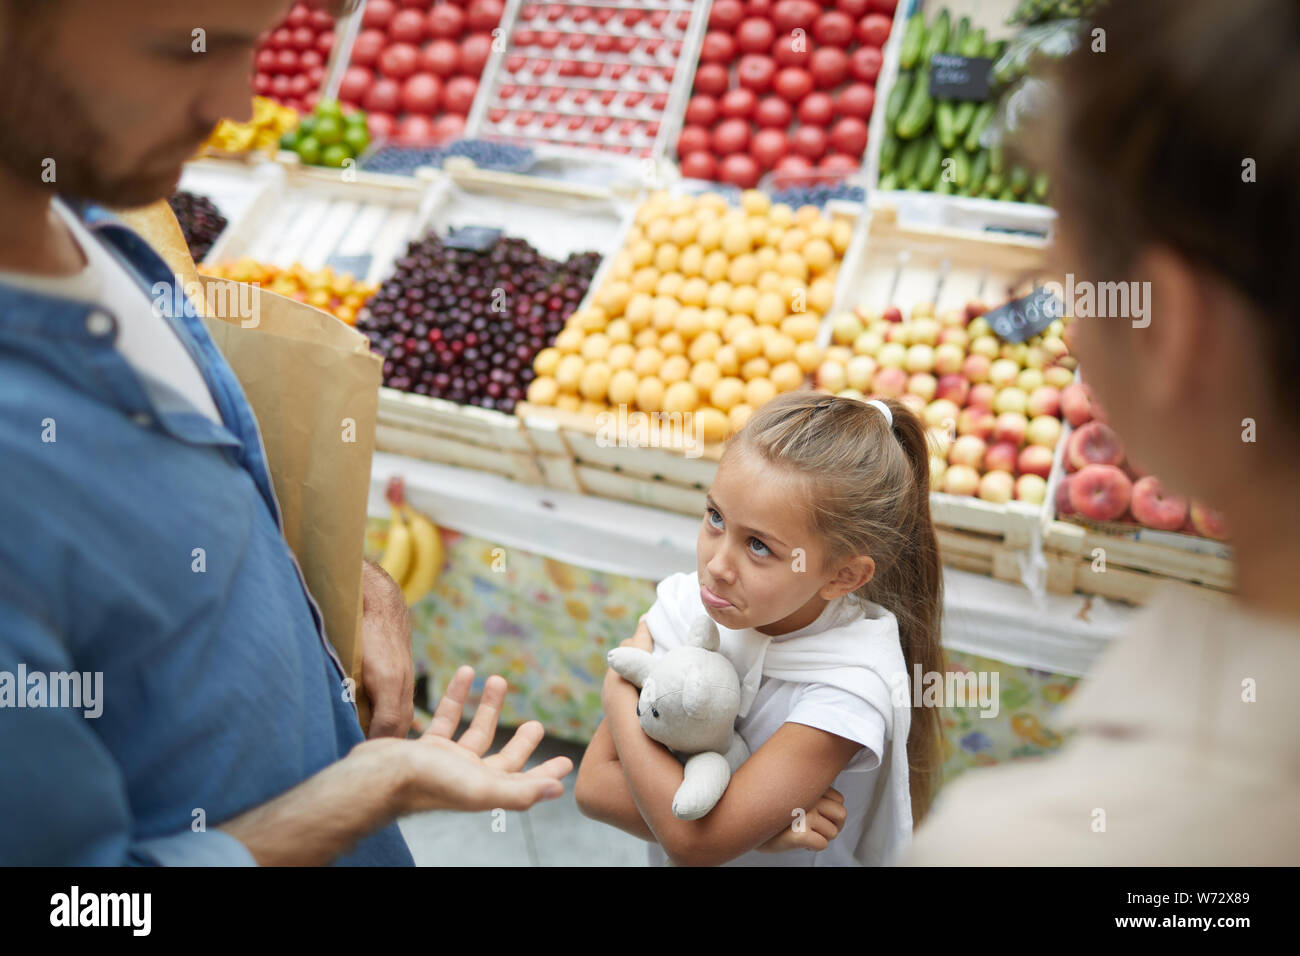 High angle view at spoiled little girl refusing to cooperate with parents at farmers market, copy space Stock Photo